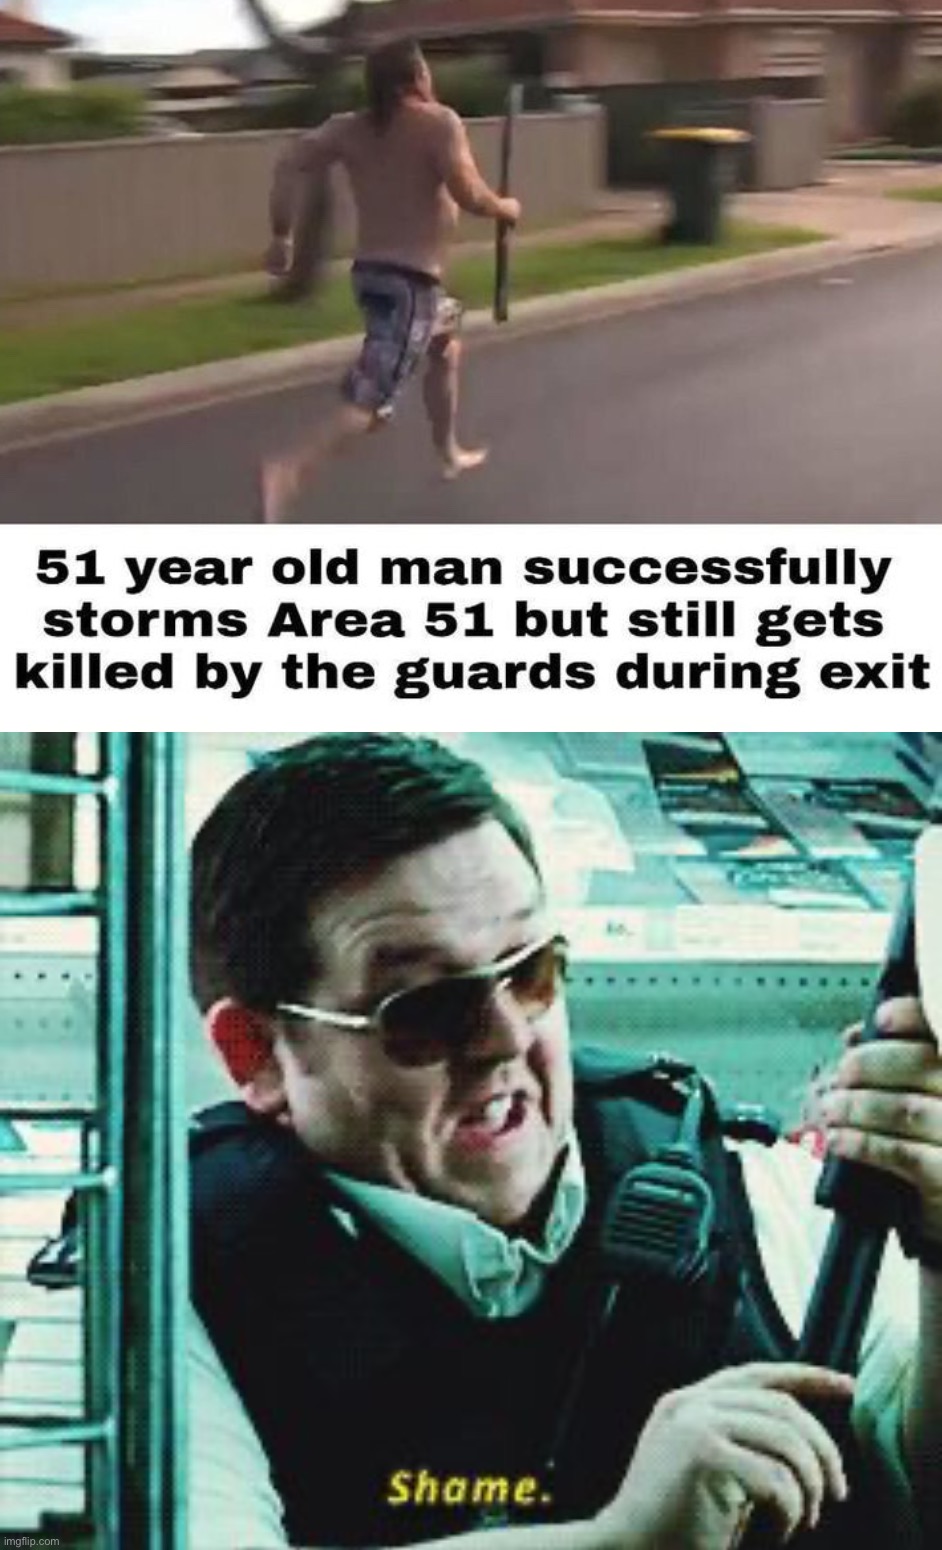 What a shame | image tagged in shame,memes,funny,area 51,hillbilly,wait what | made w/ Imgflip meme maker